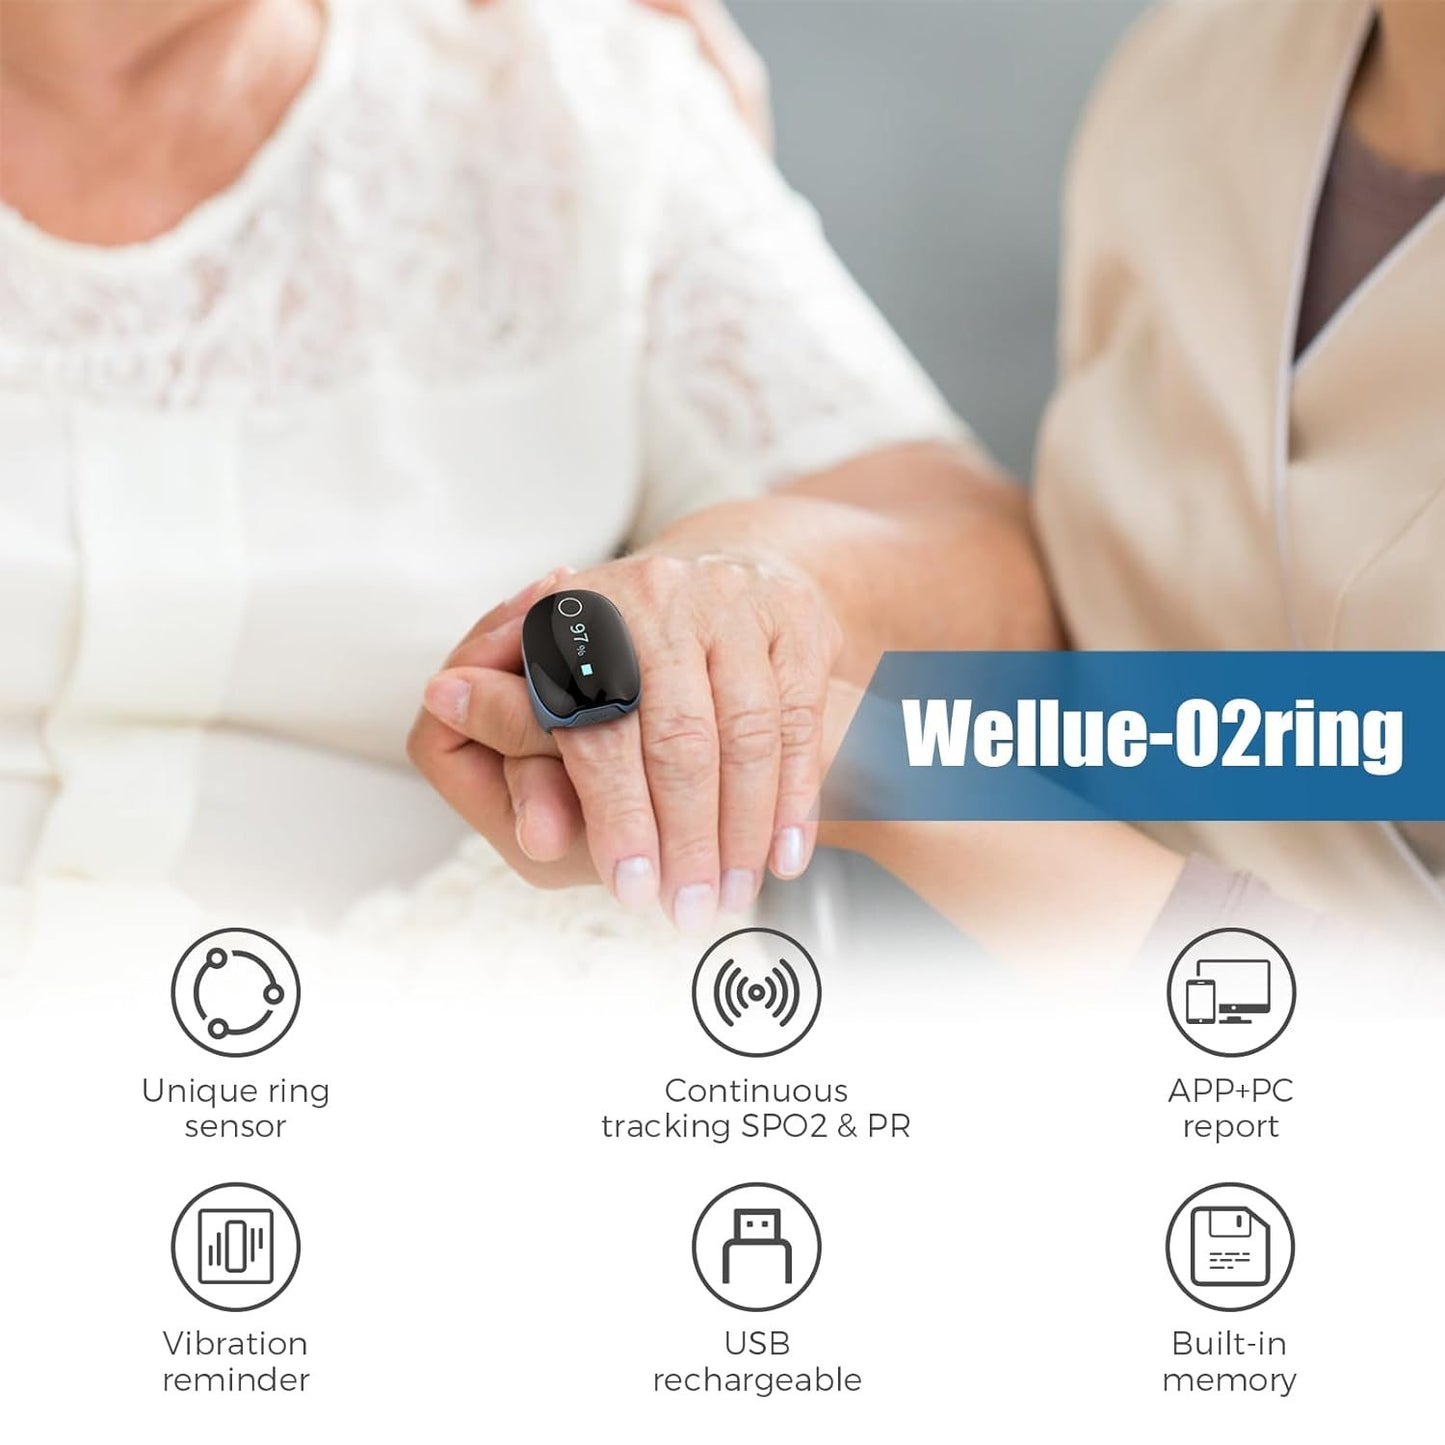 Display Item: Wellue O2 SPO2 Ring. Oxygen saturation tracking.